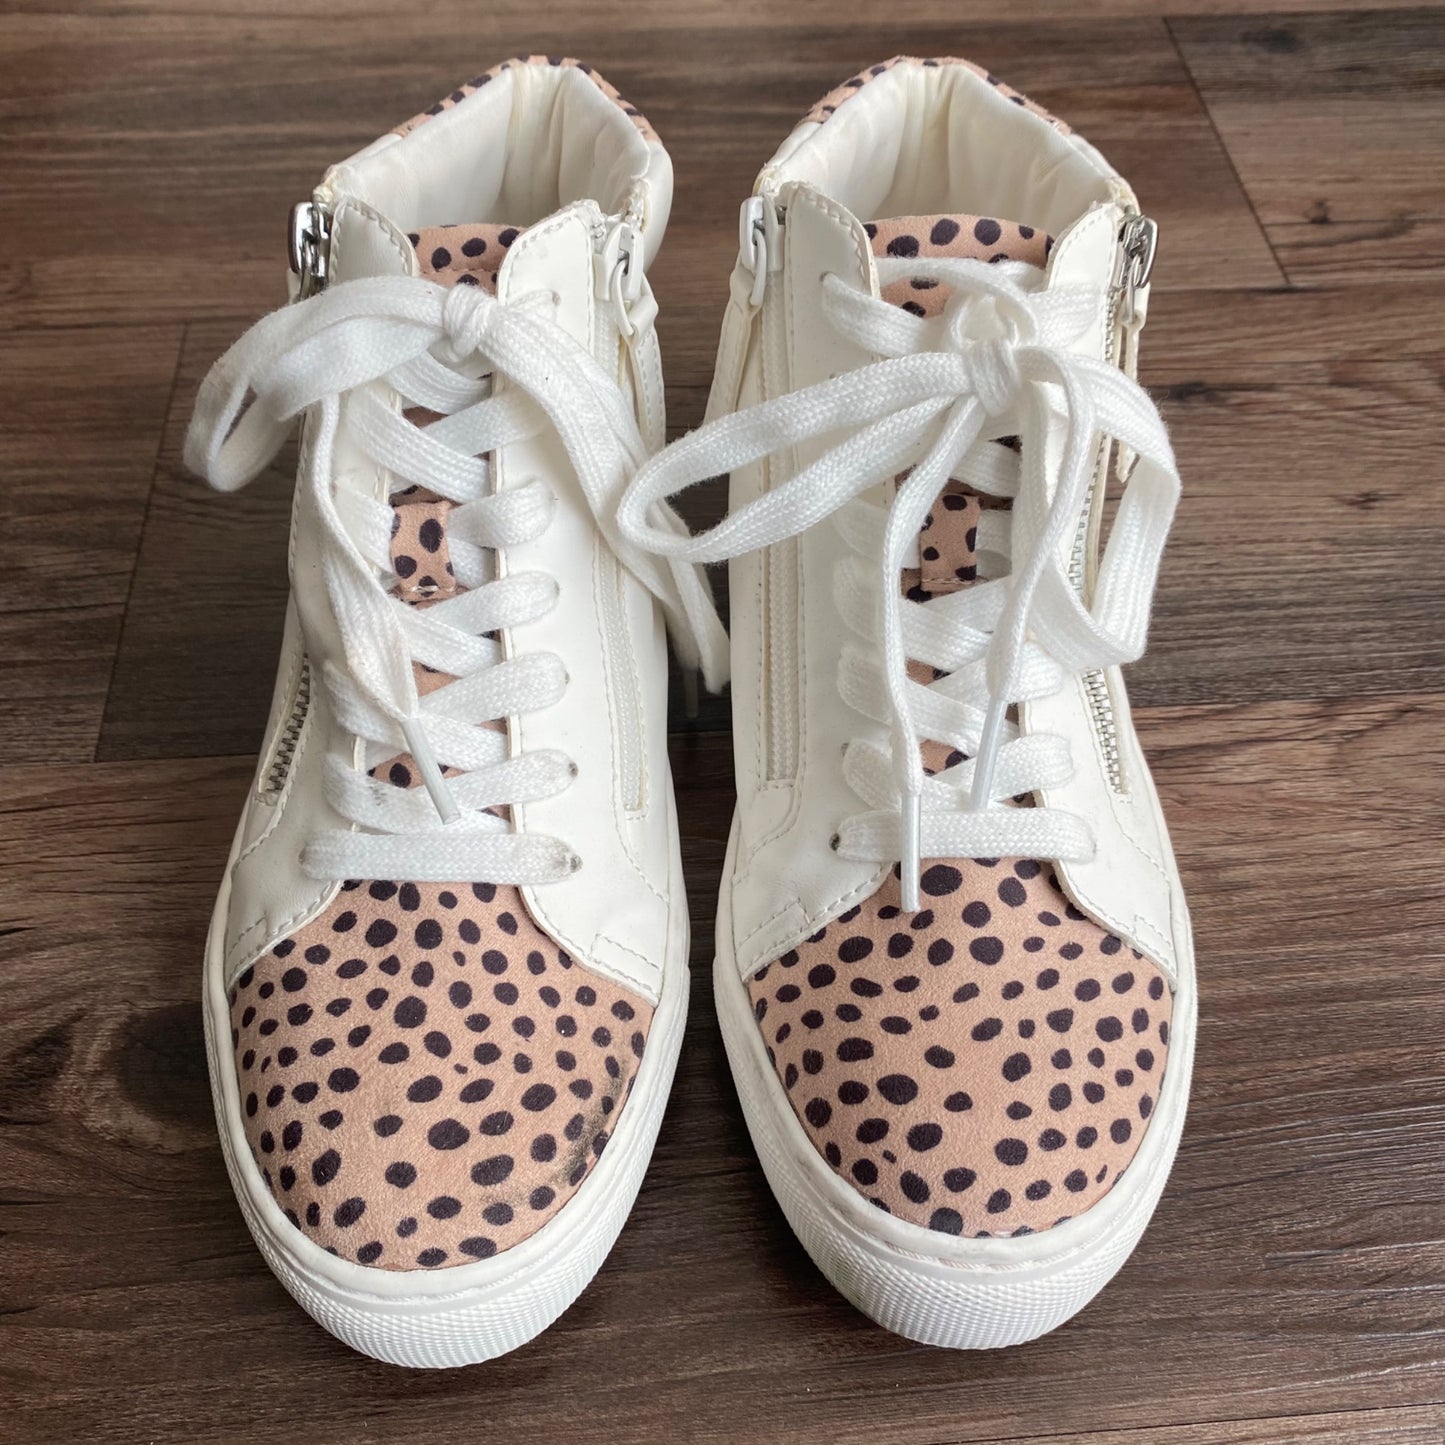 Dolce Vita Sz 6 Poo Bear lace up high top shoes NWT